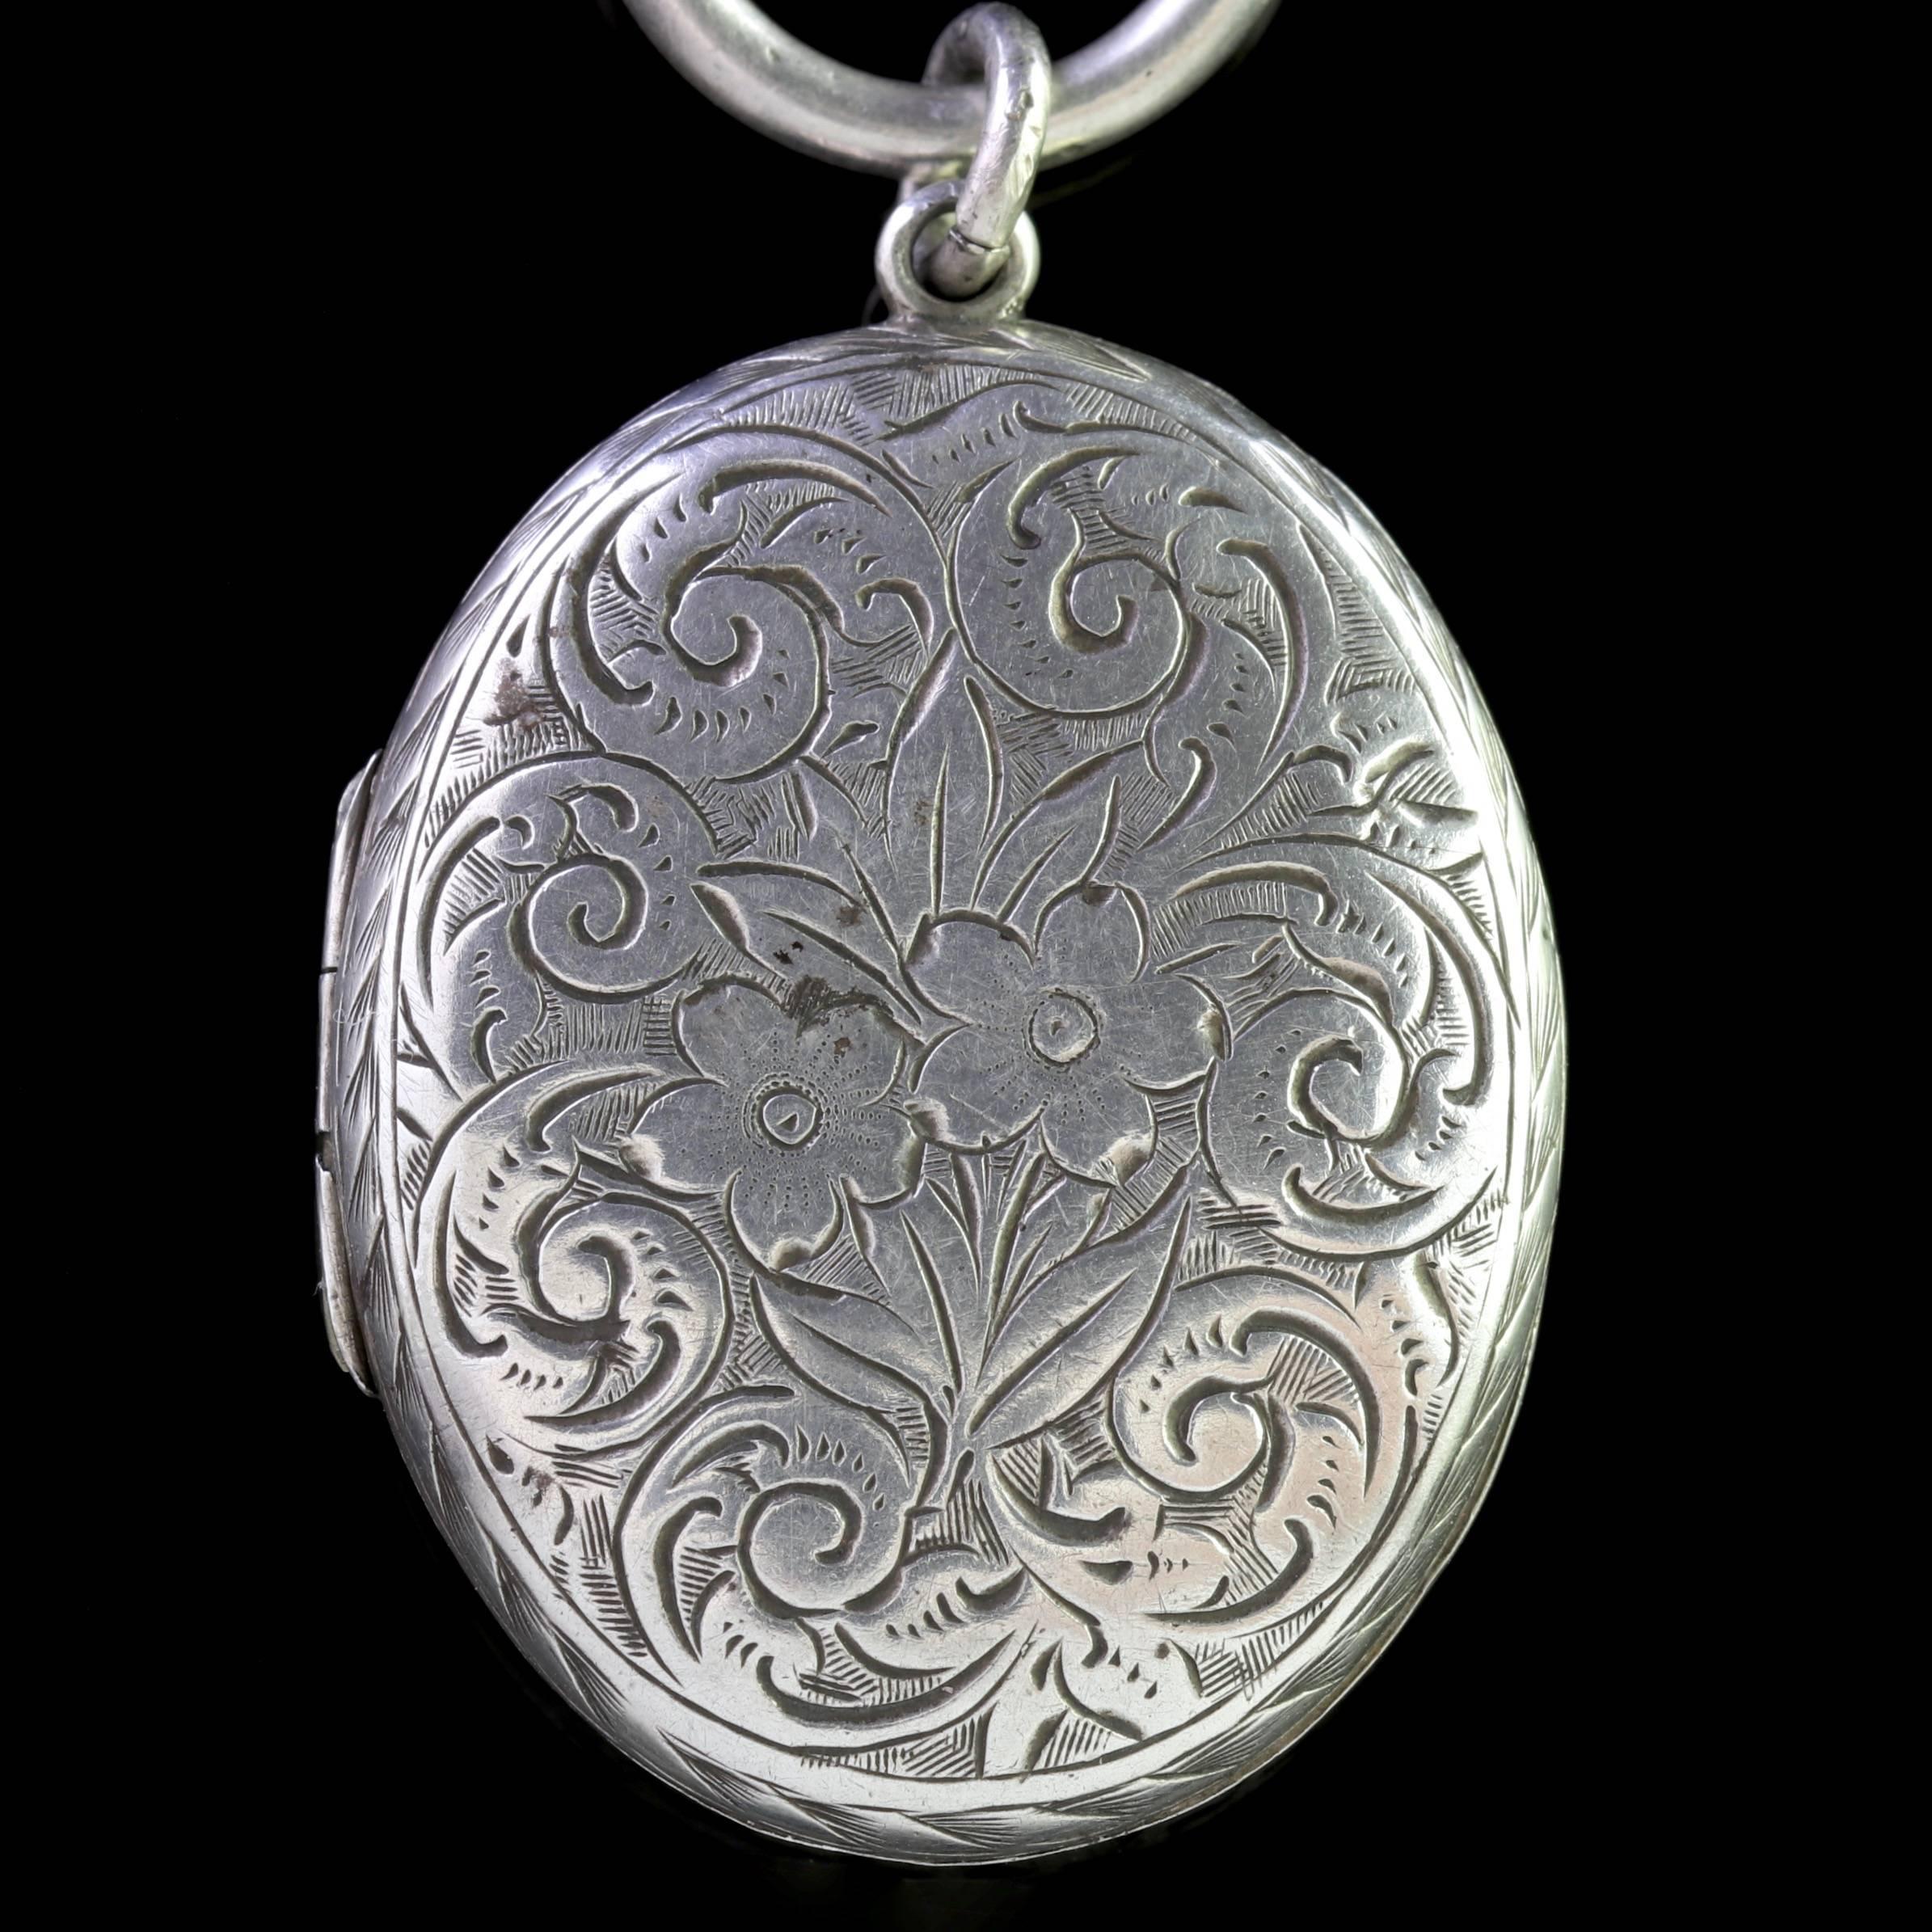 To read more please click continue reading below-

This fabulous antique Sterling Silver Locket and Collar is genuine Victorian Circa 1900.

The wonderful locket displays beautifully engraved floral motifs boasting pristine Victorian workmanship of